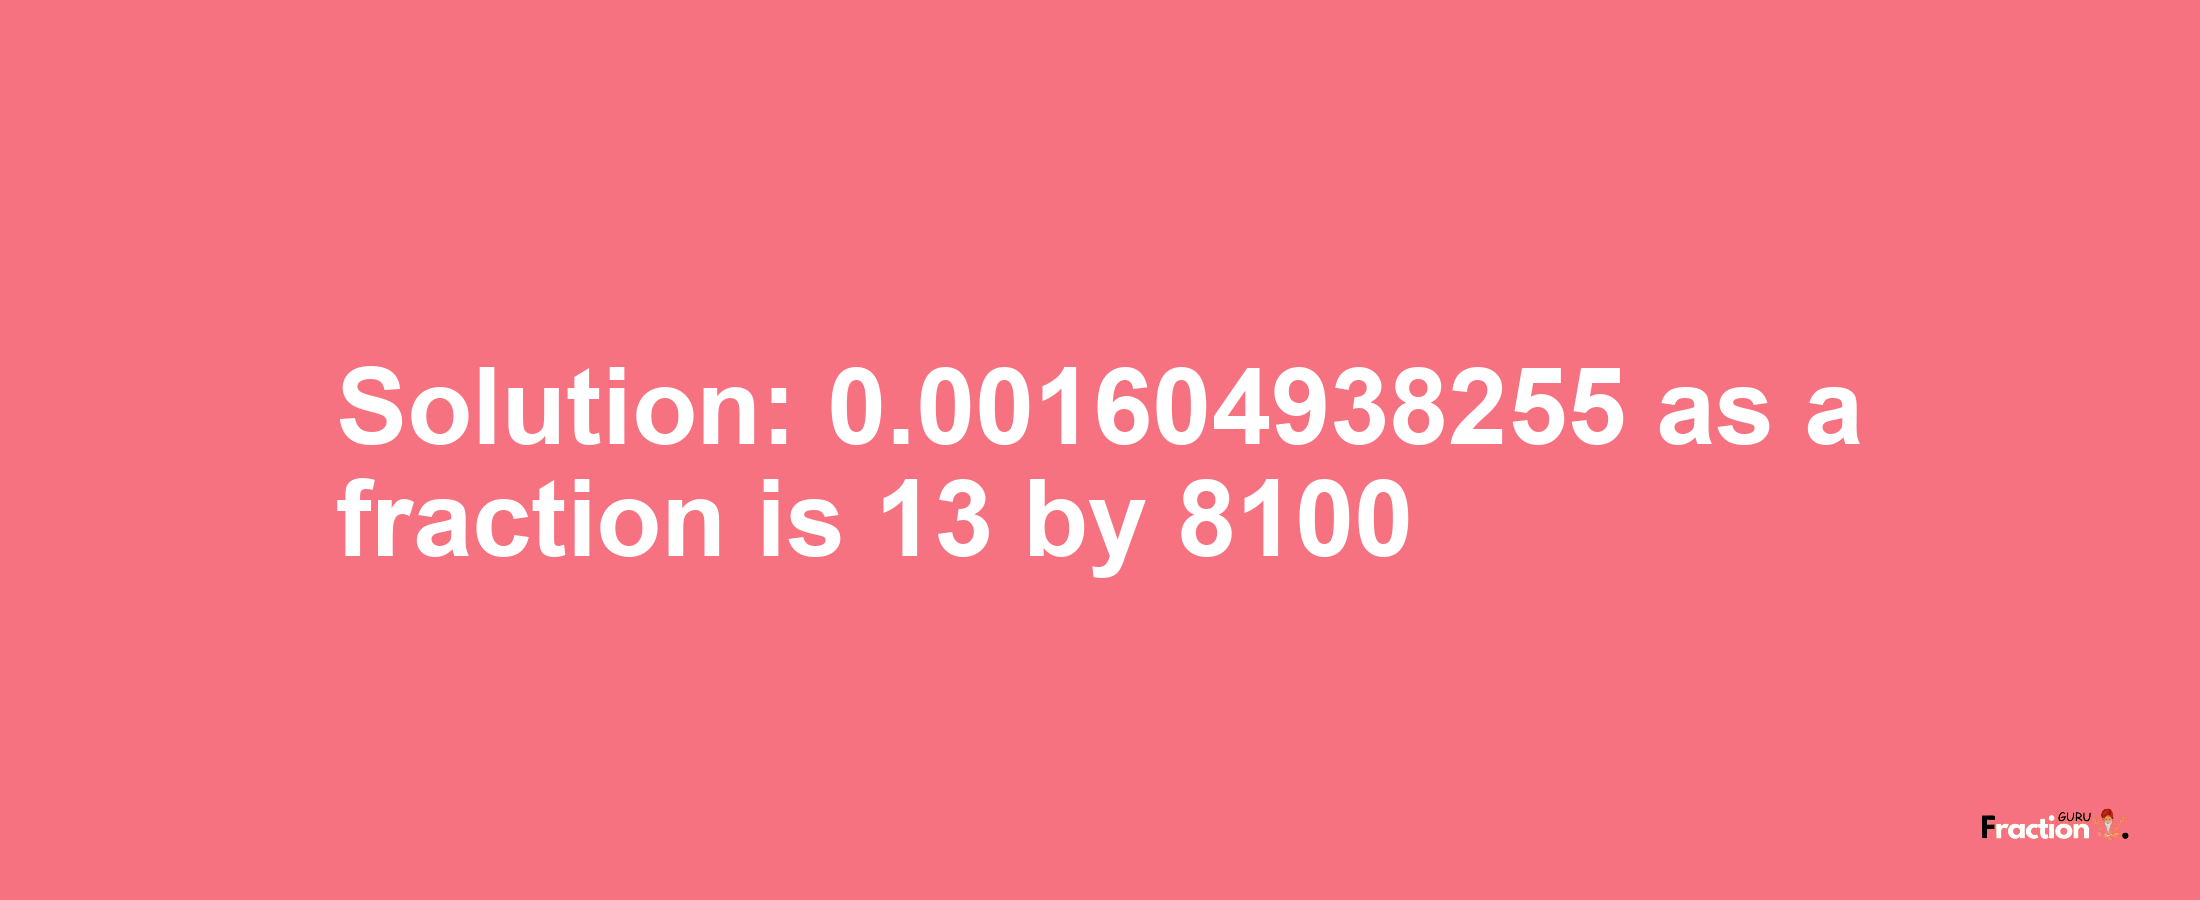 Solution:0.001604938255 as a fraction is 13/8100